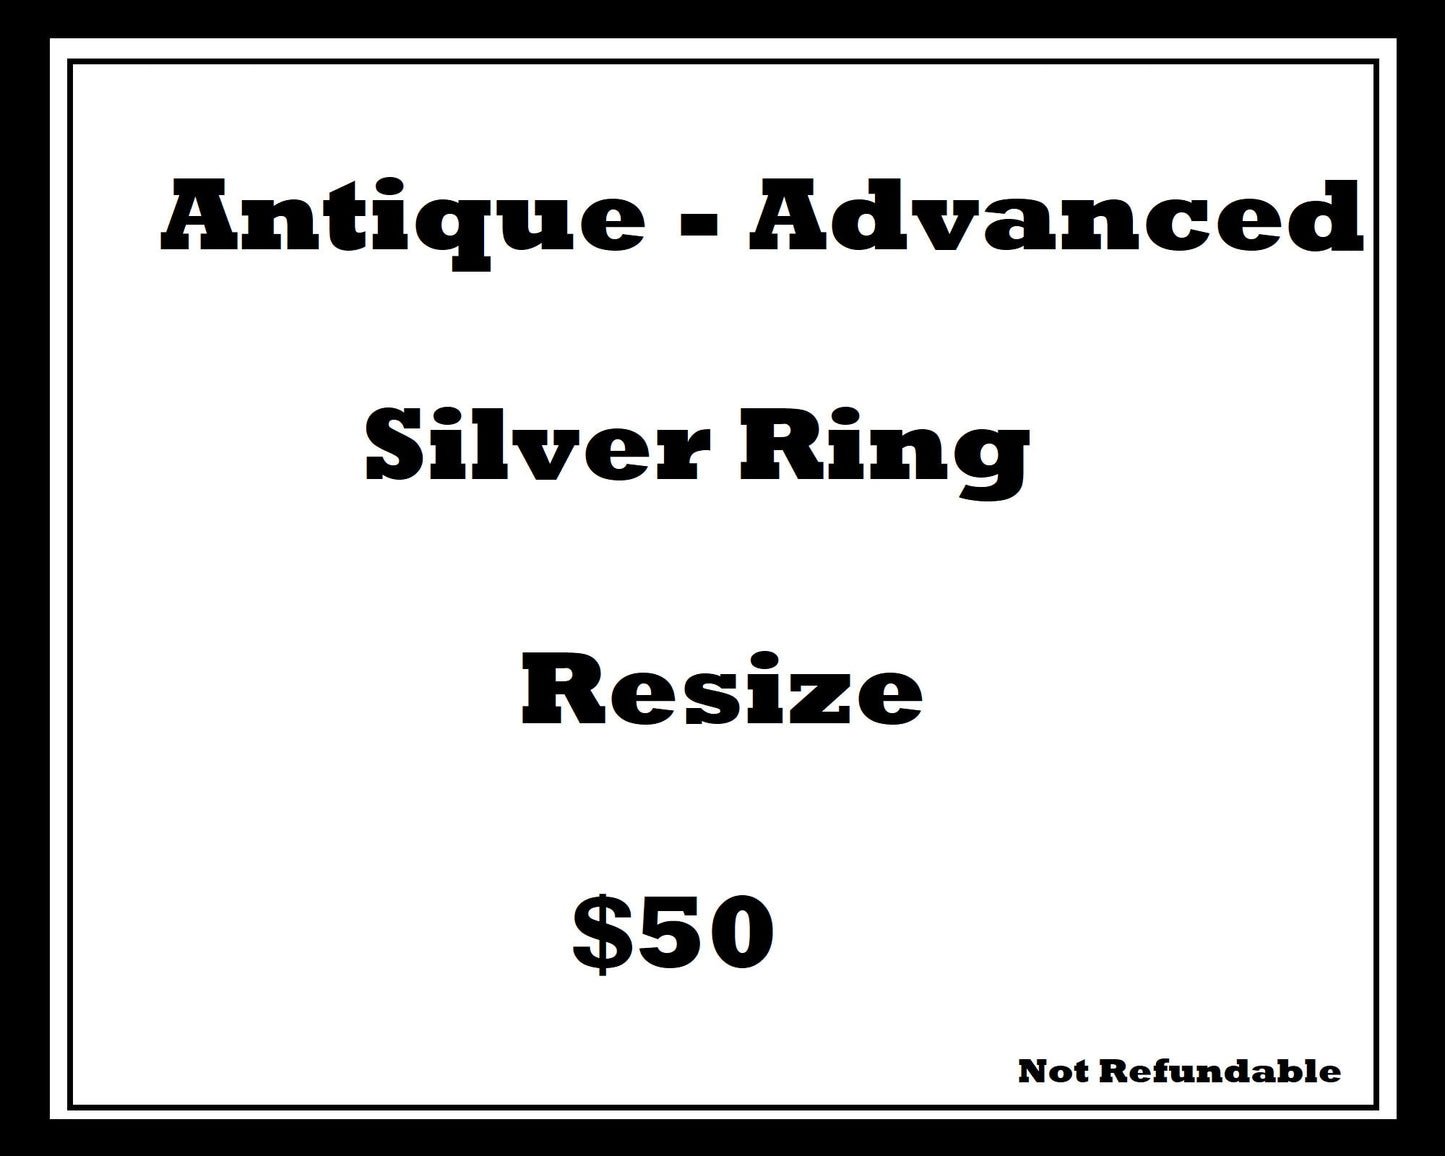 Antique & Difficult Silver Ring Resize